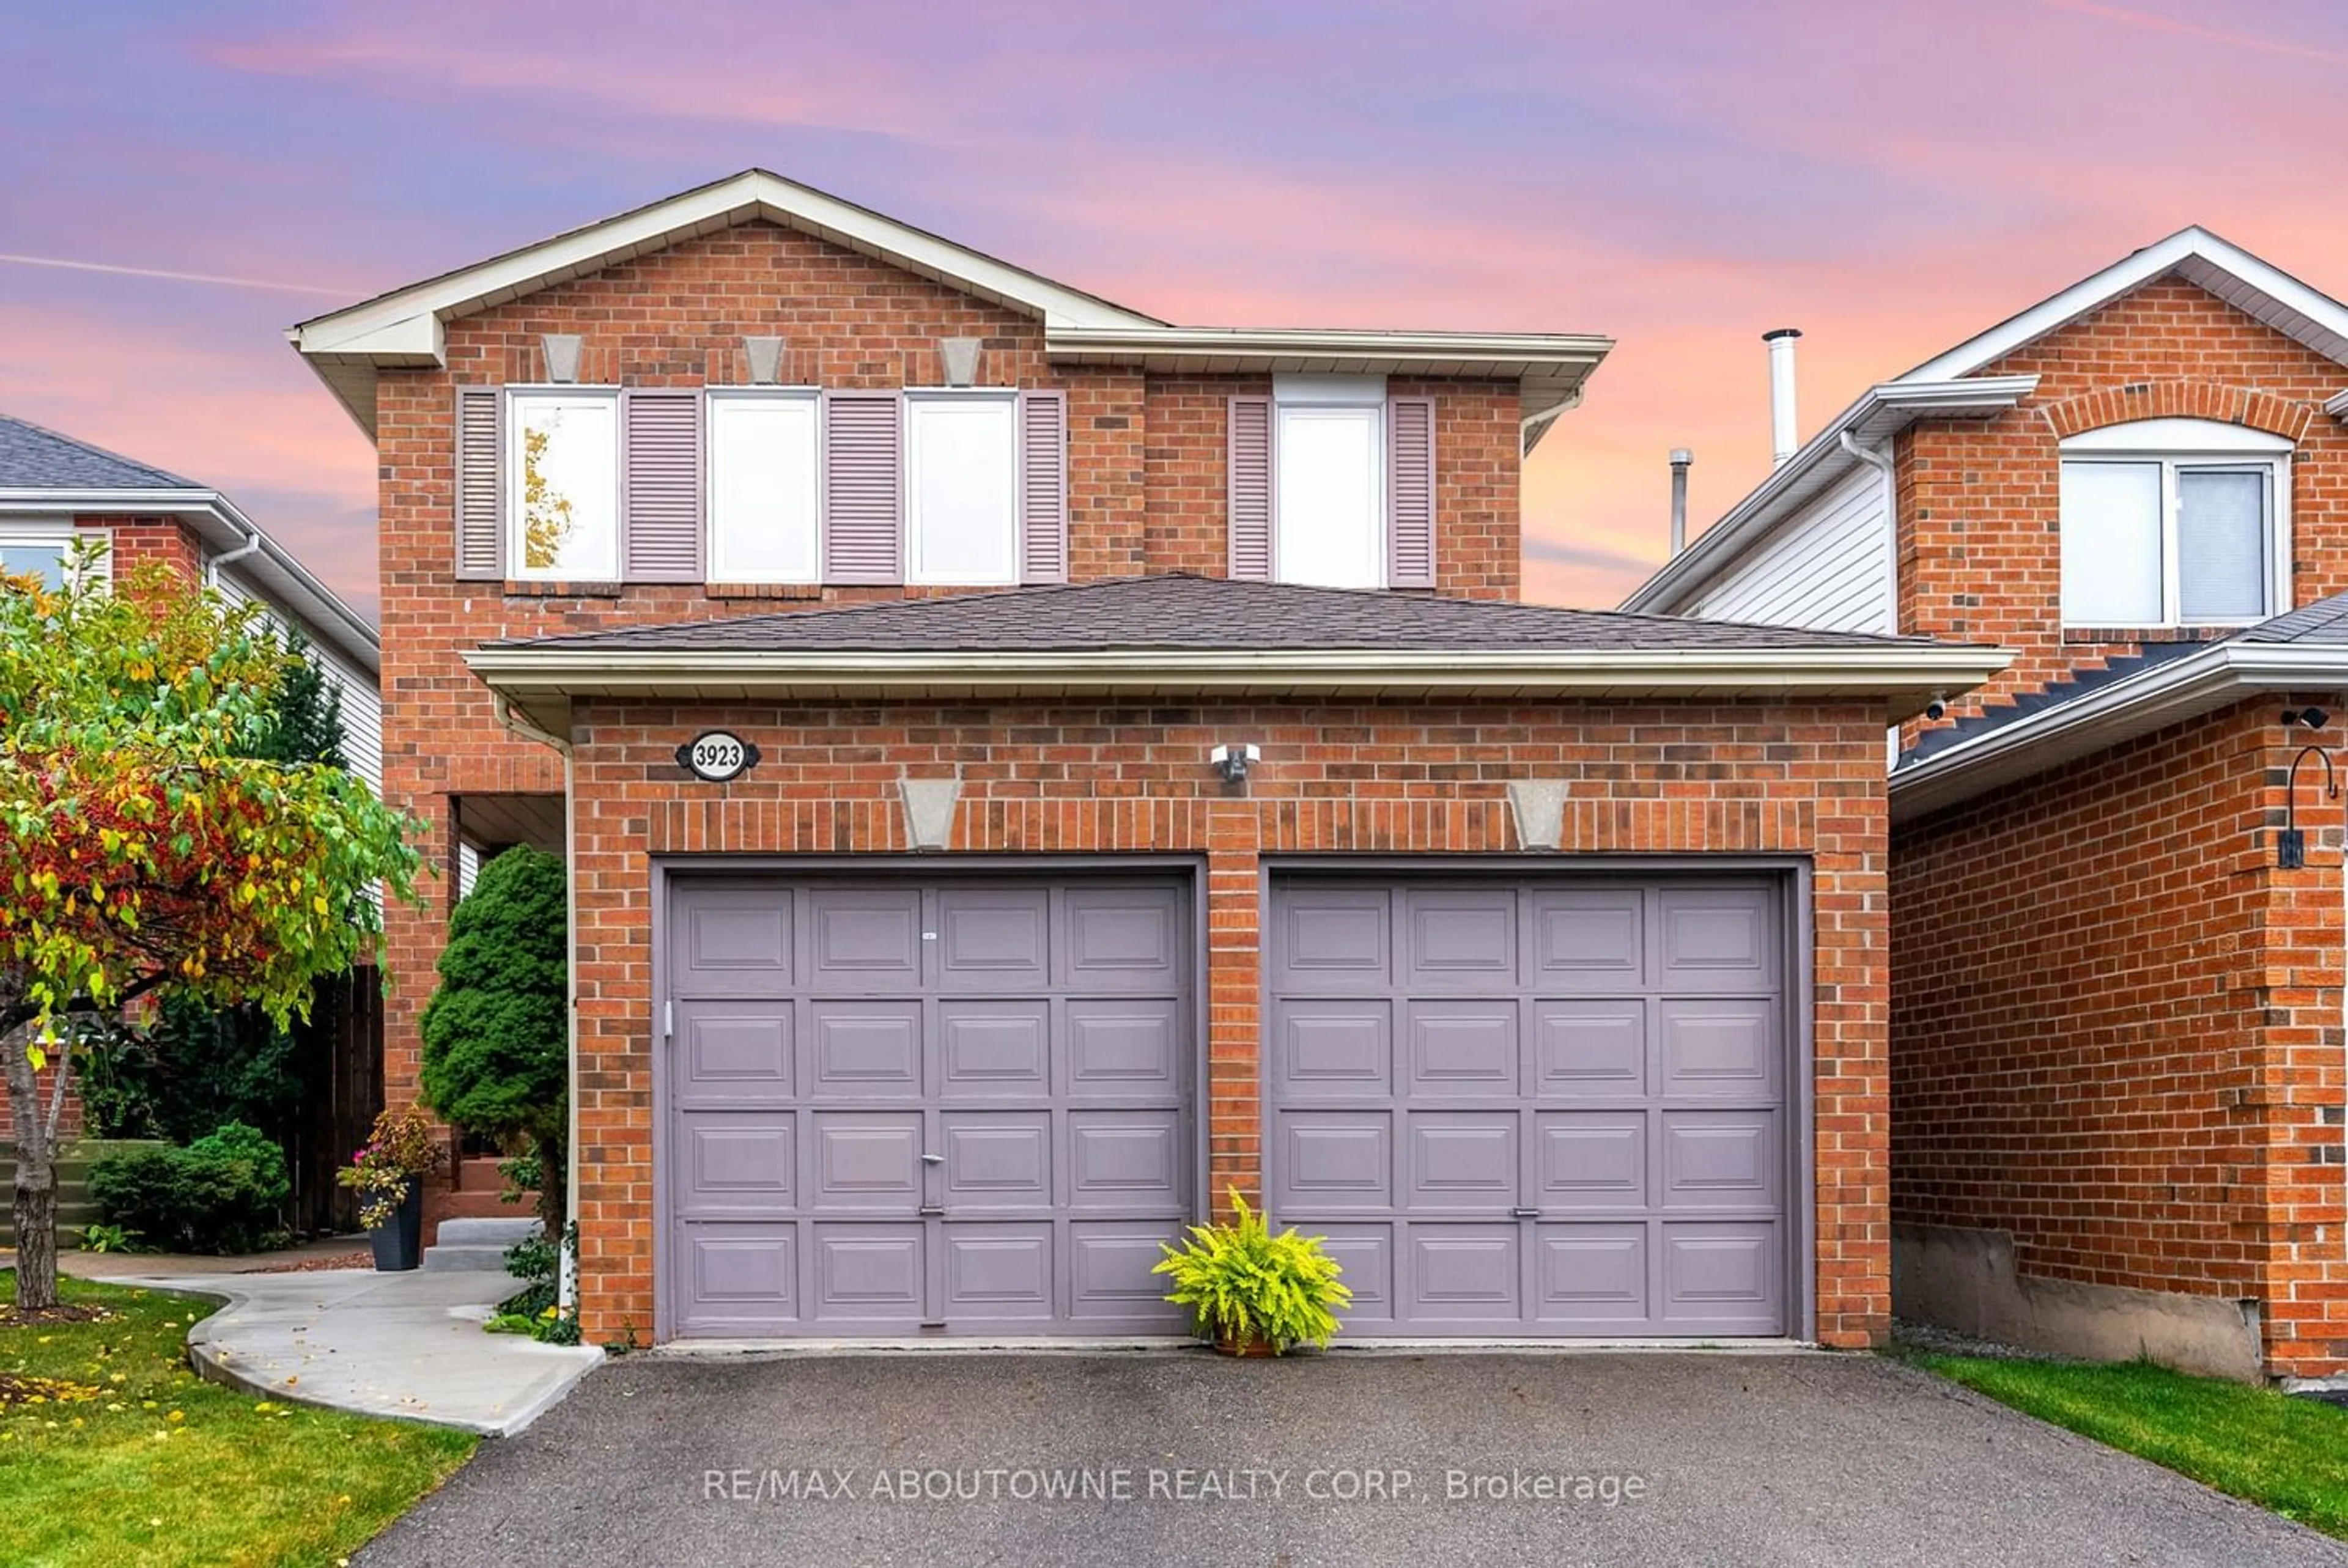 Home with brick exterior material for 3923 Rushton Cres, Mississauga Ontario L5L 4H8